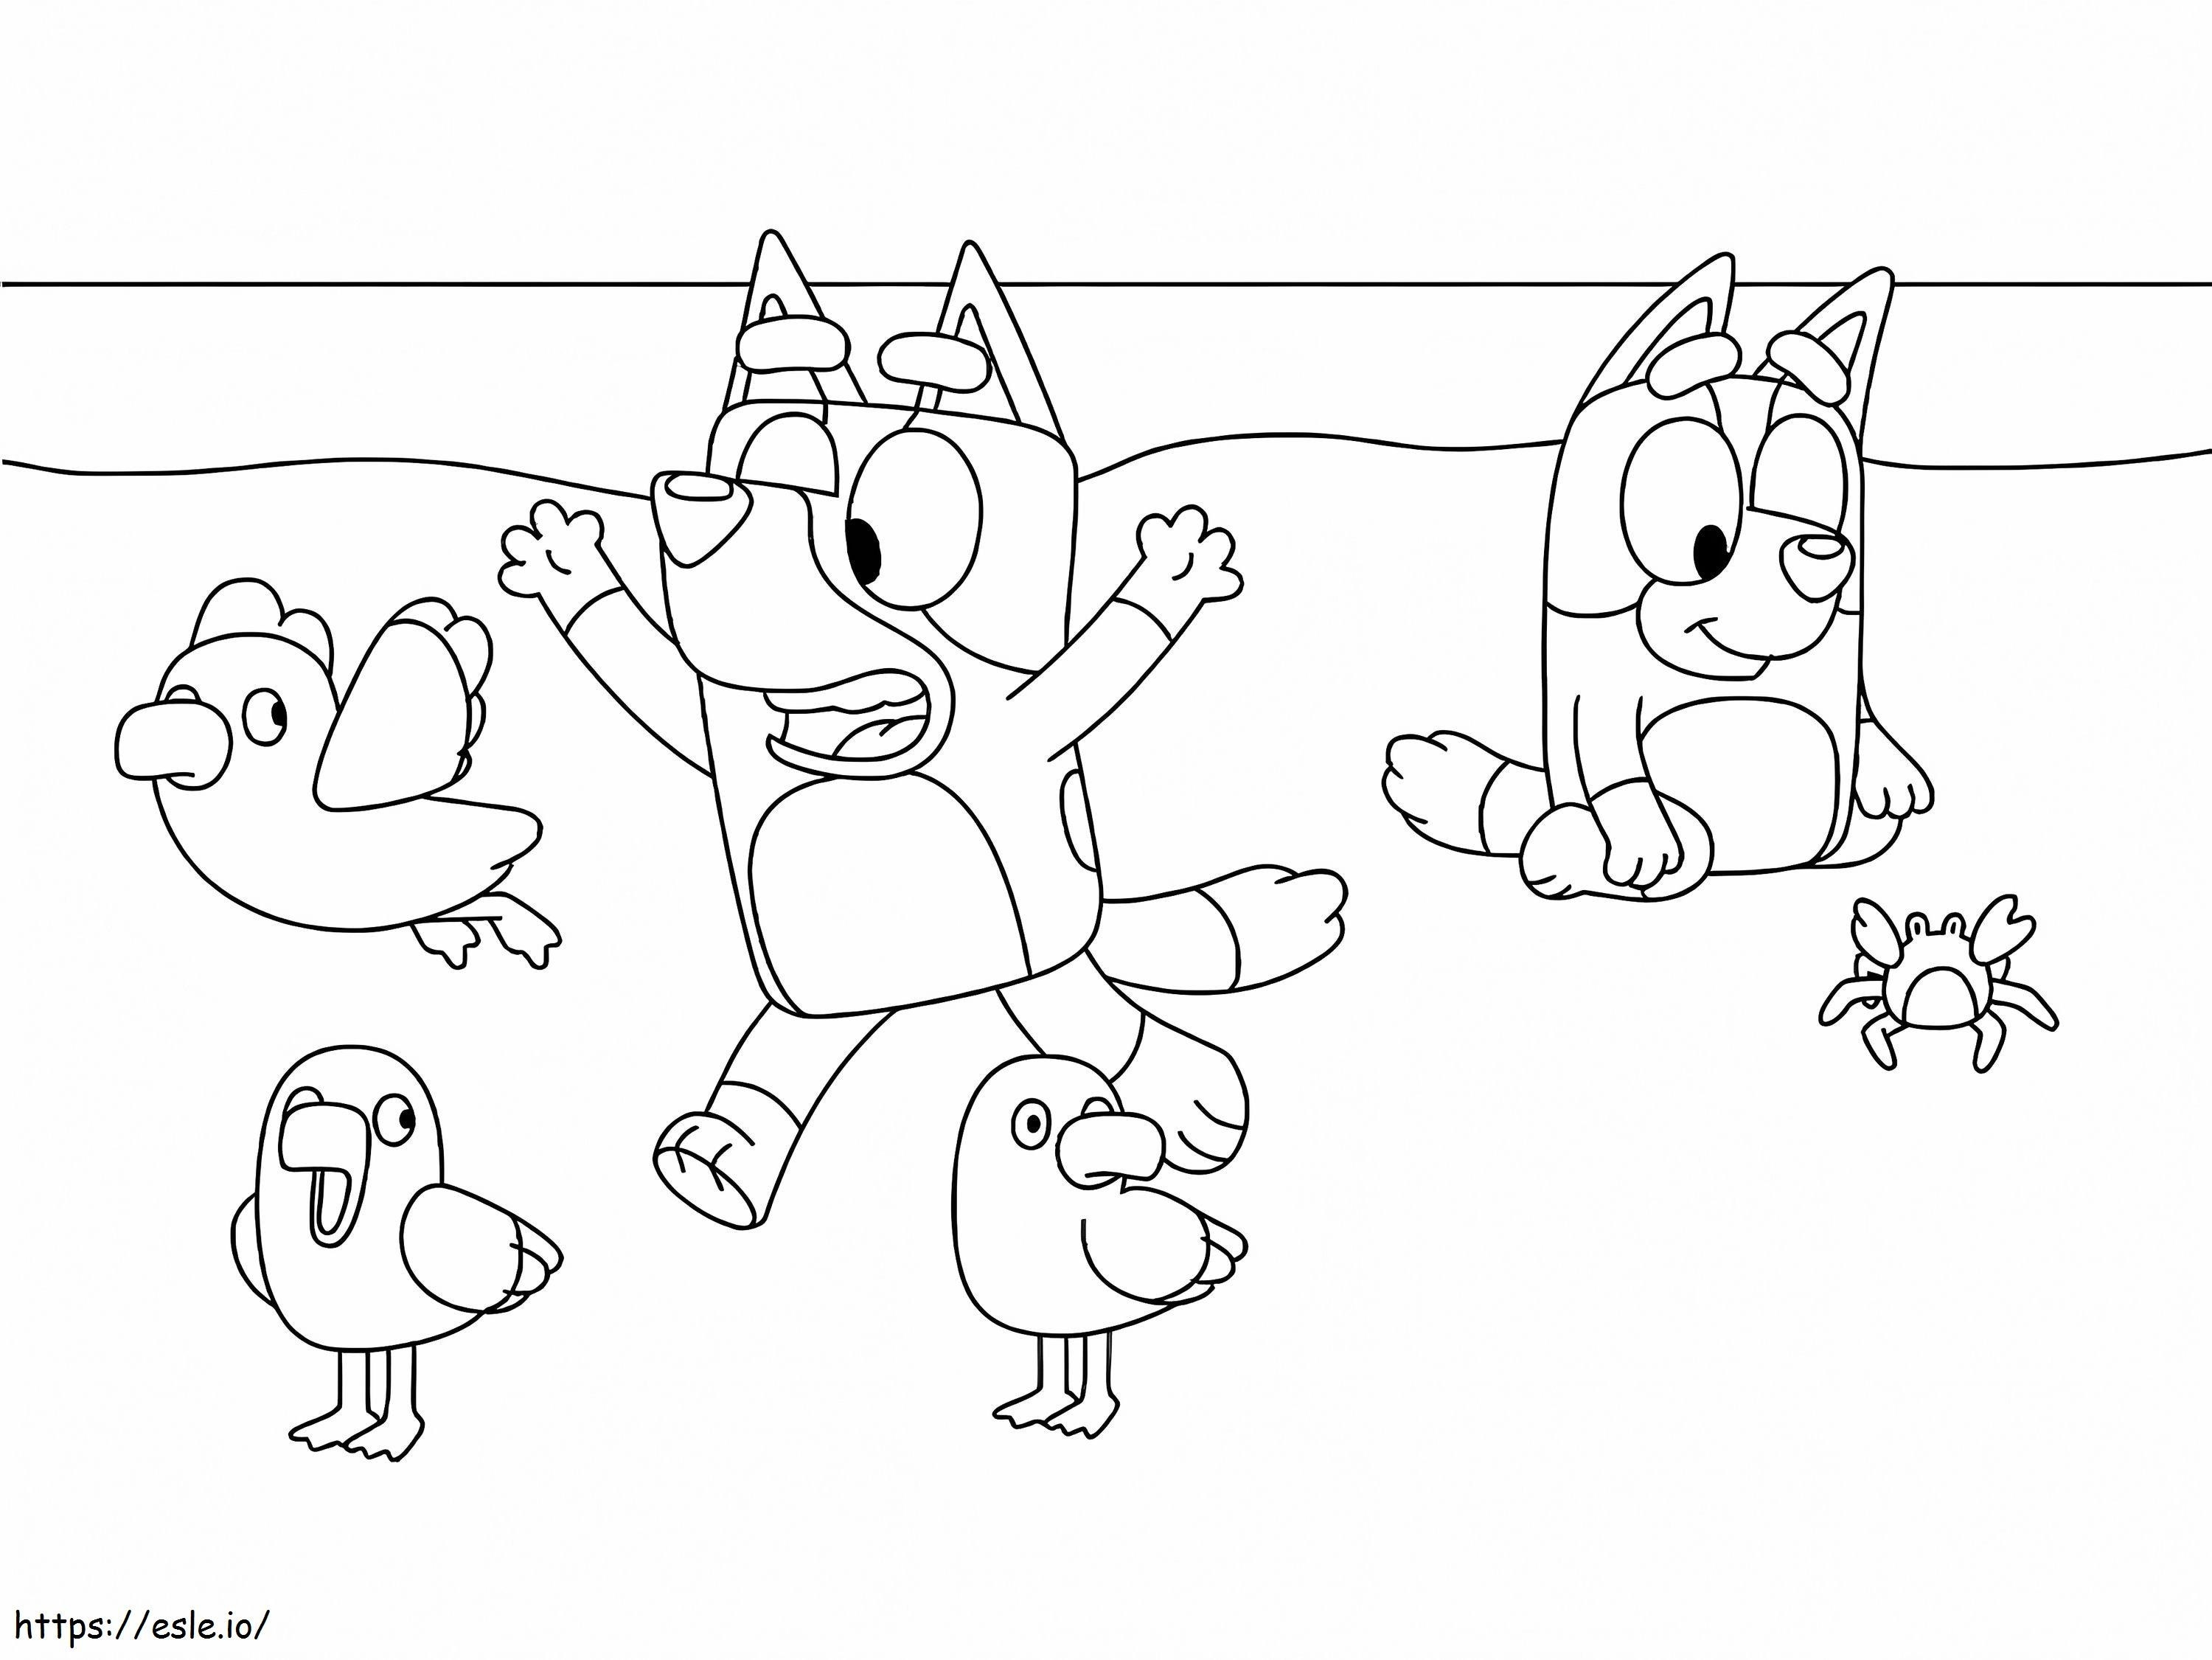 1591580433 1582826875Bluey On The Beach coloring page